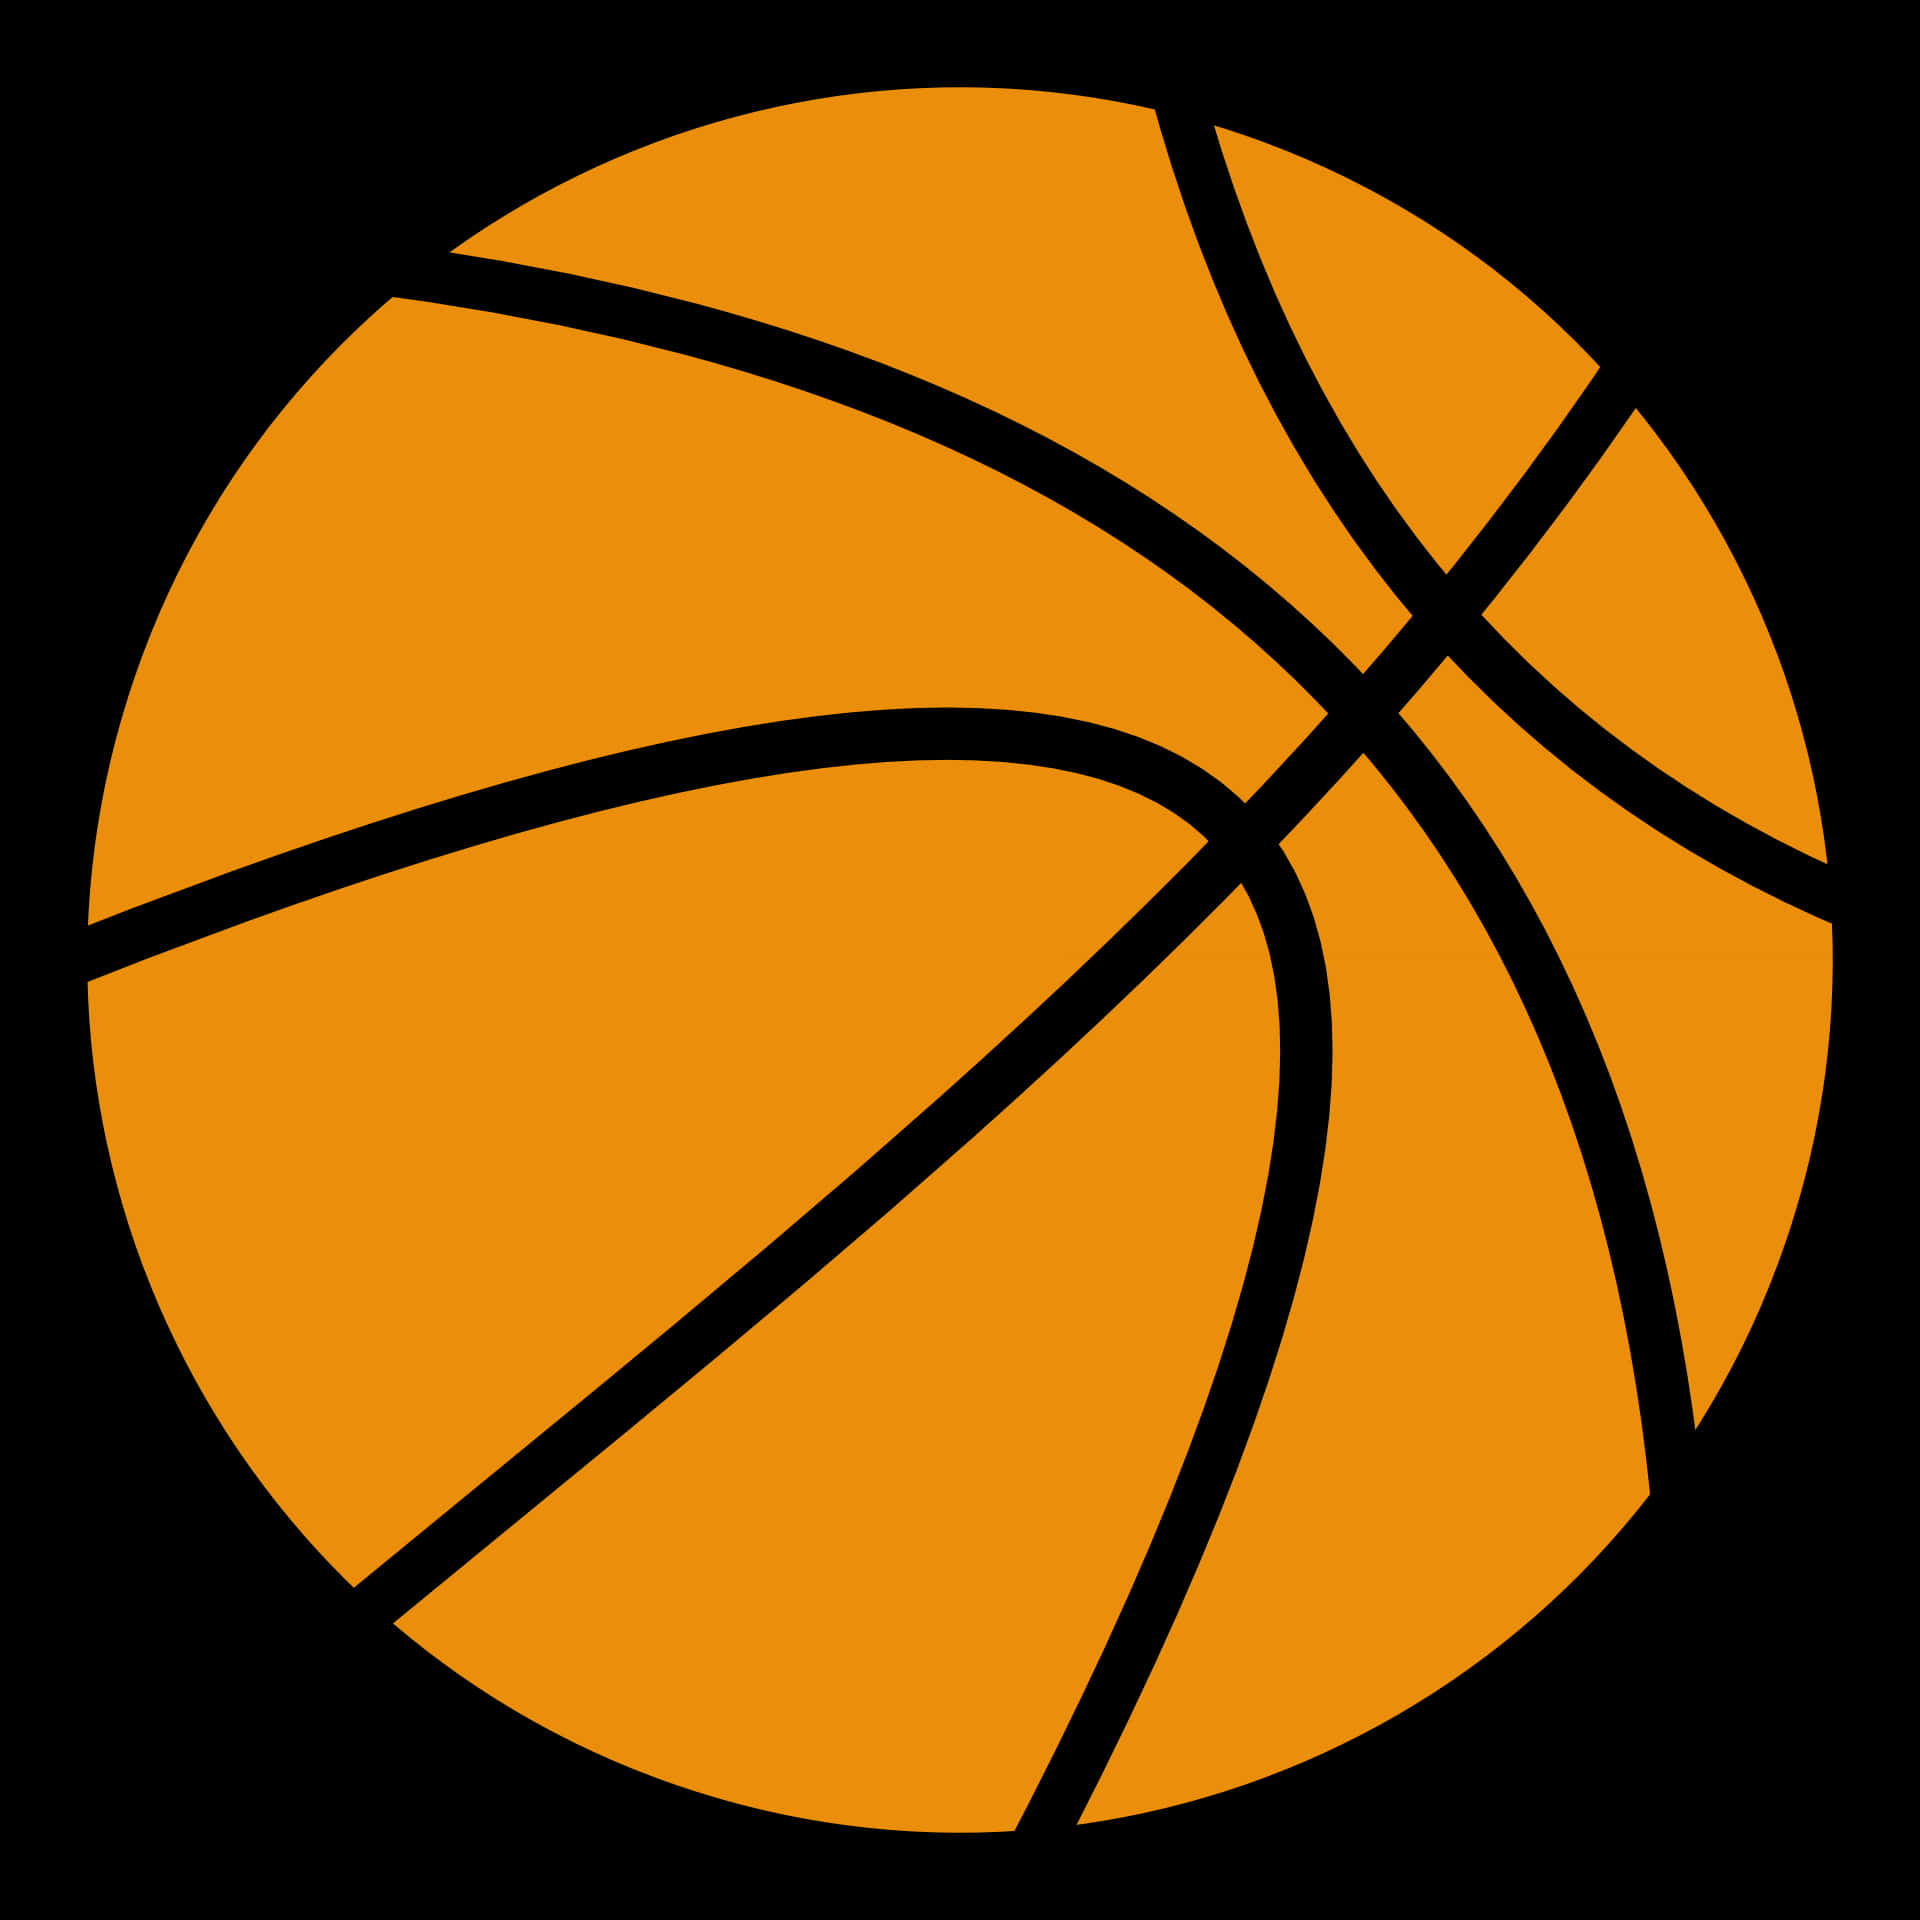 Black And White Basketball Clipart - Basketball Clipart, Hd Png Download